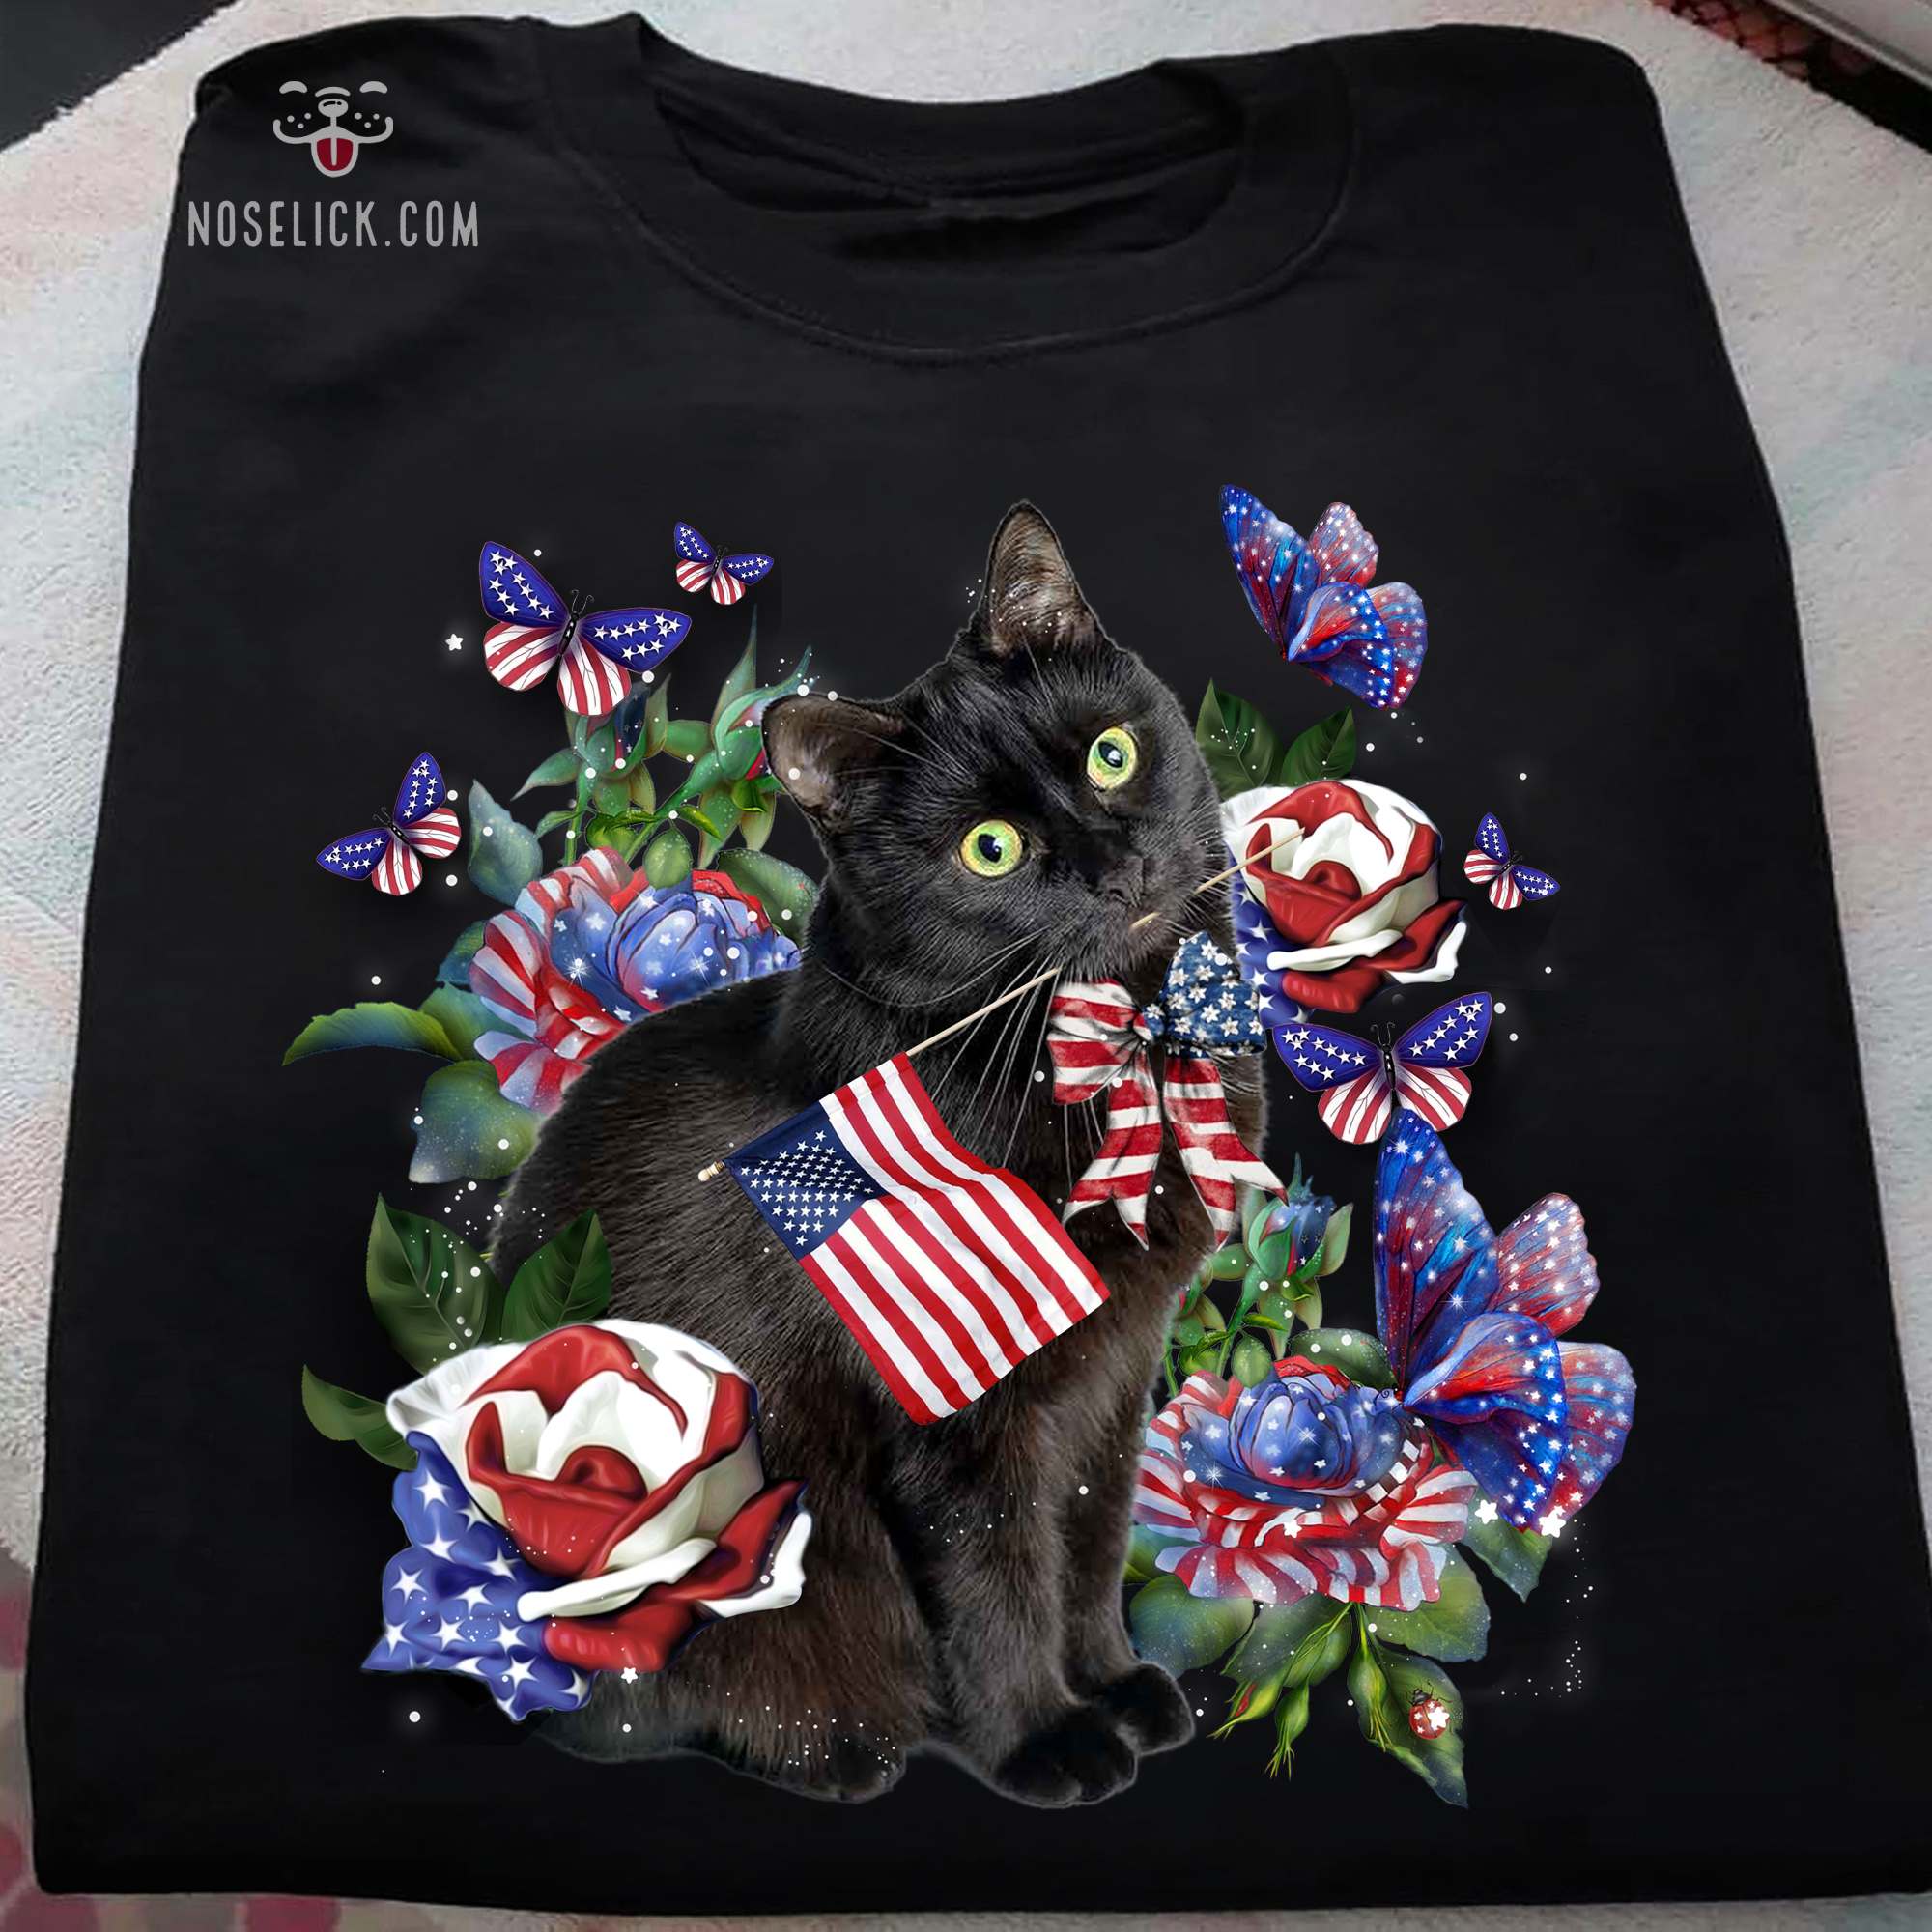 Black cat with America flag - America independence day